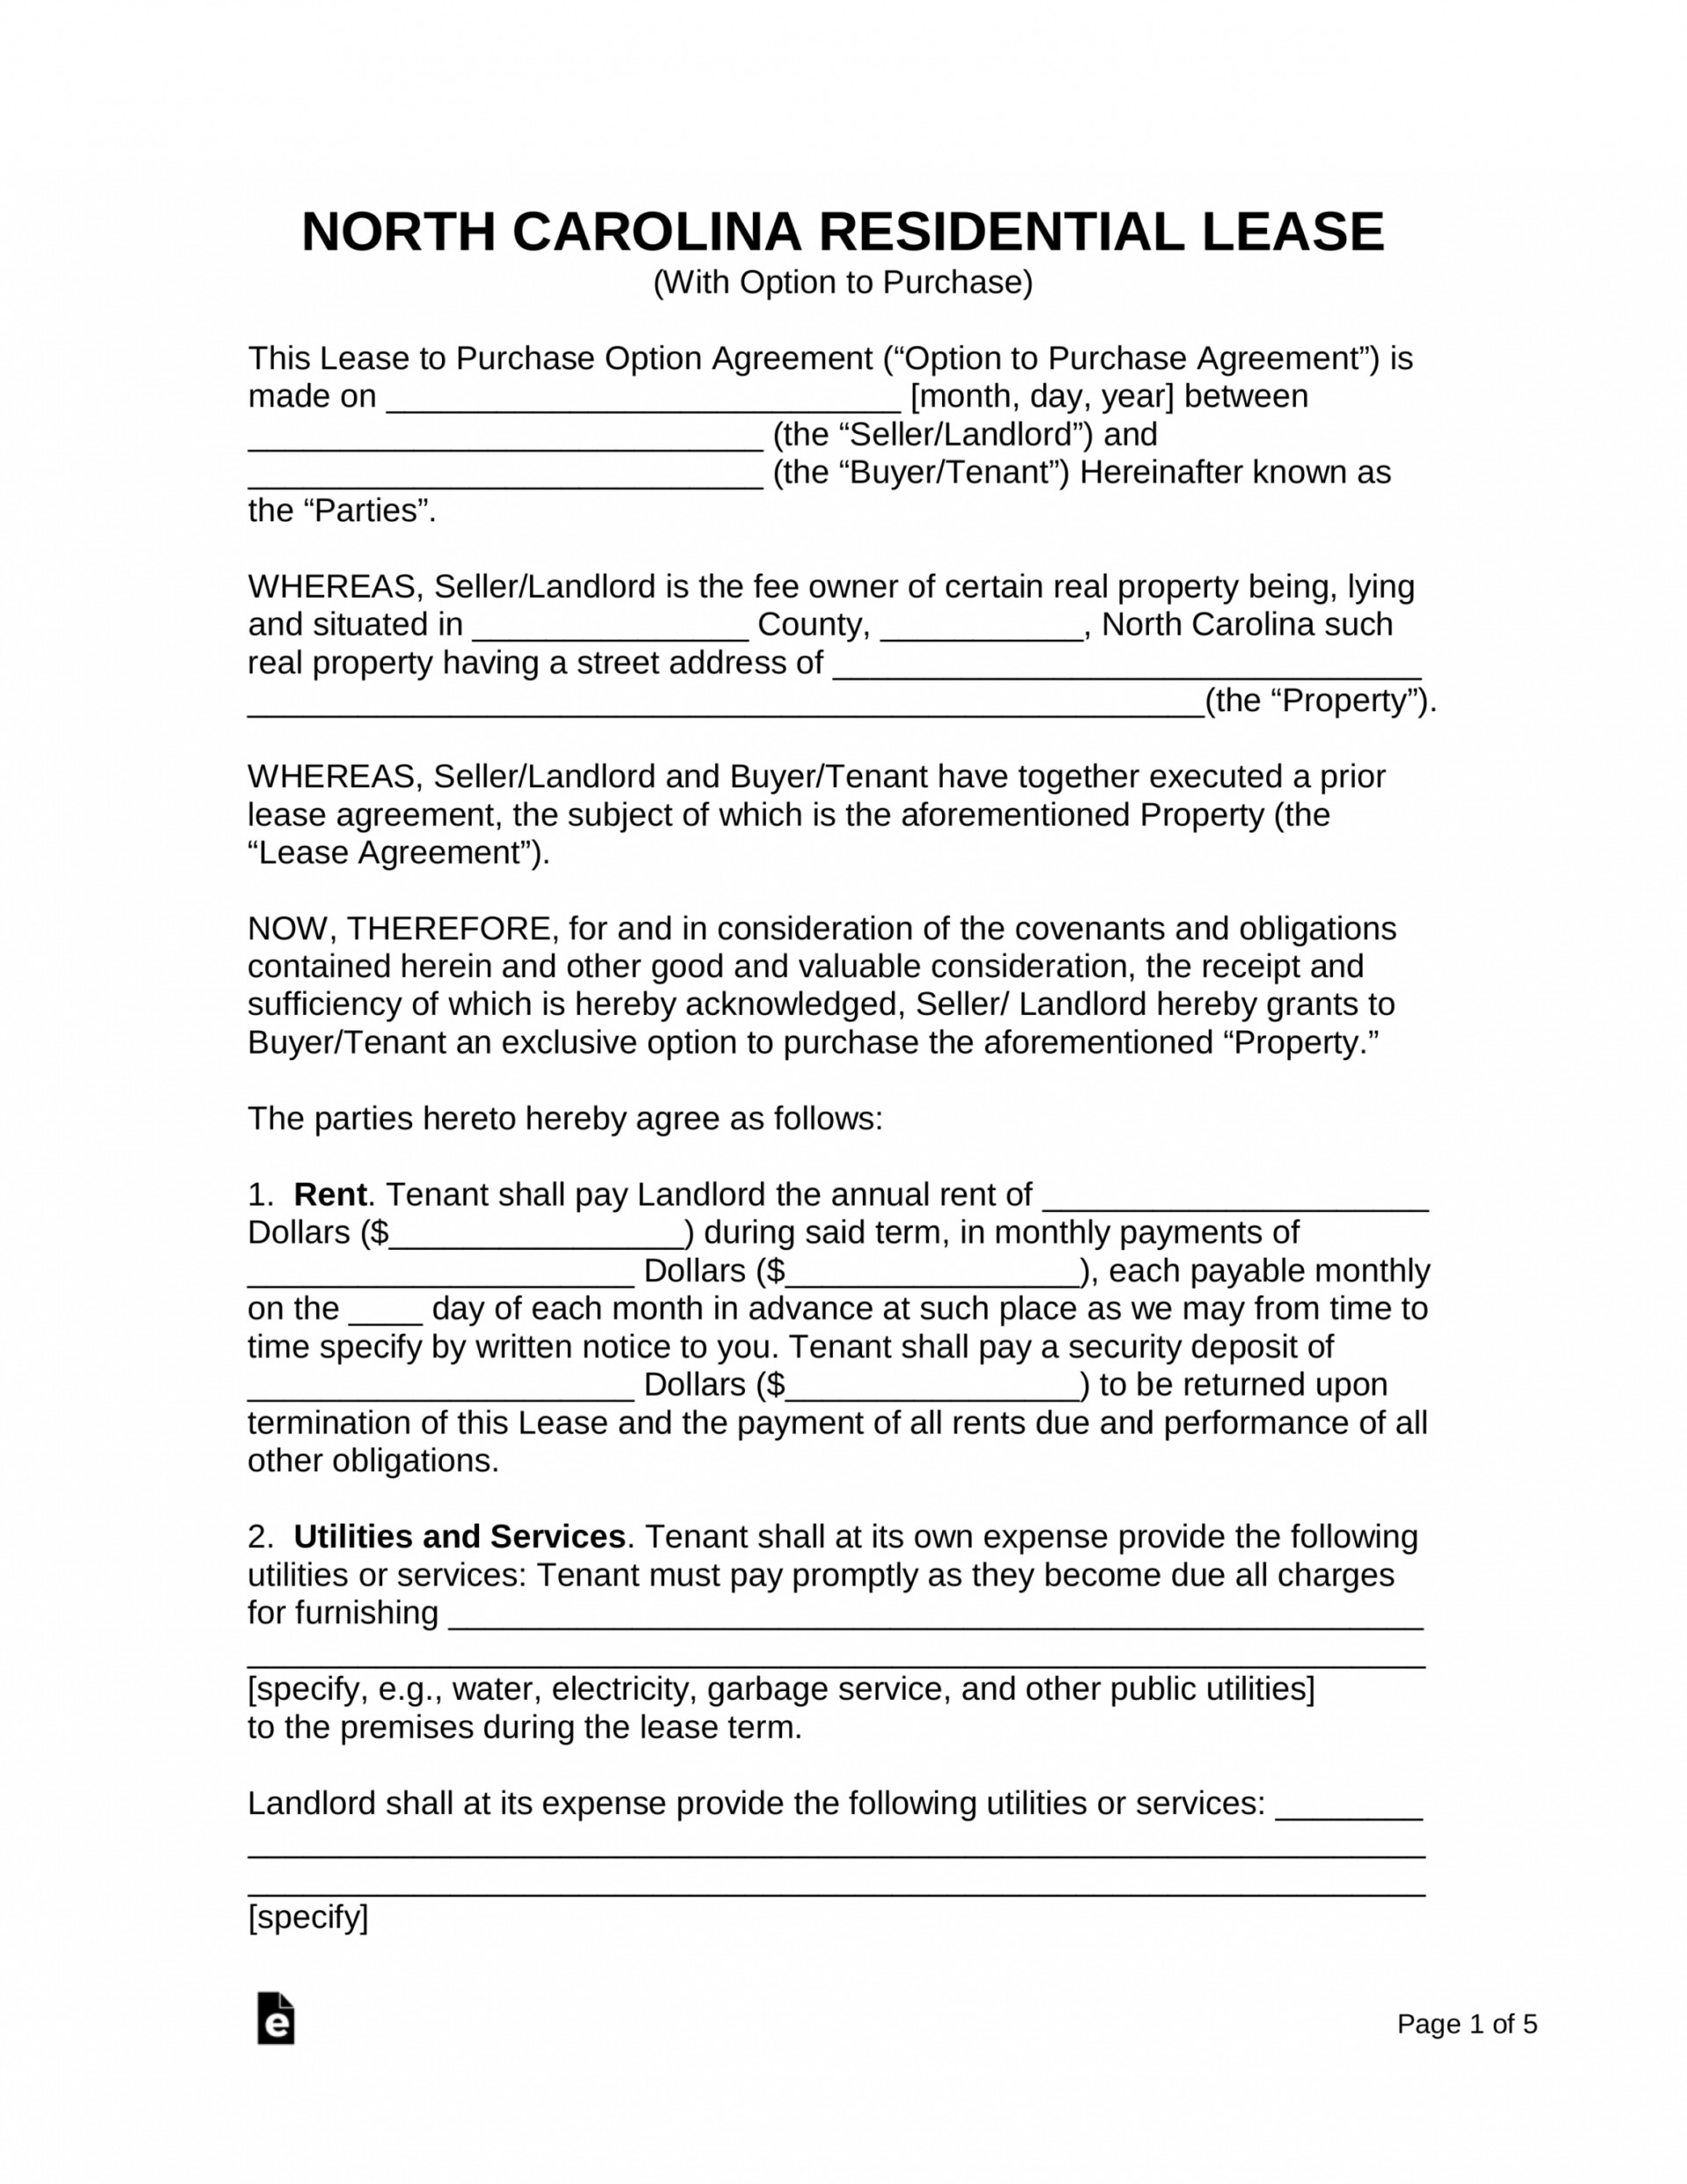 free-nc-lease-agreement-template-of-32-good-mercial-lease-agreement-nc-pi-goethecy